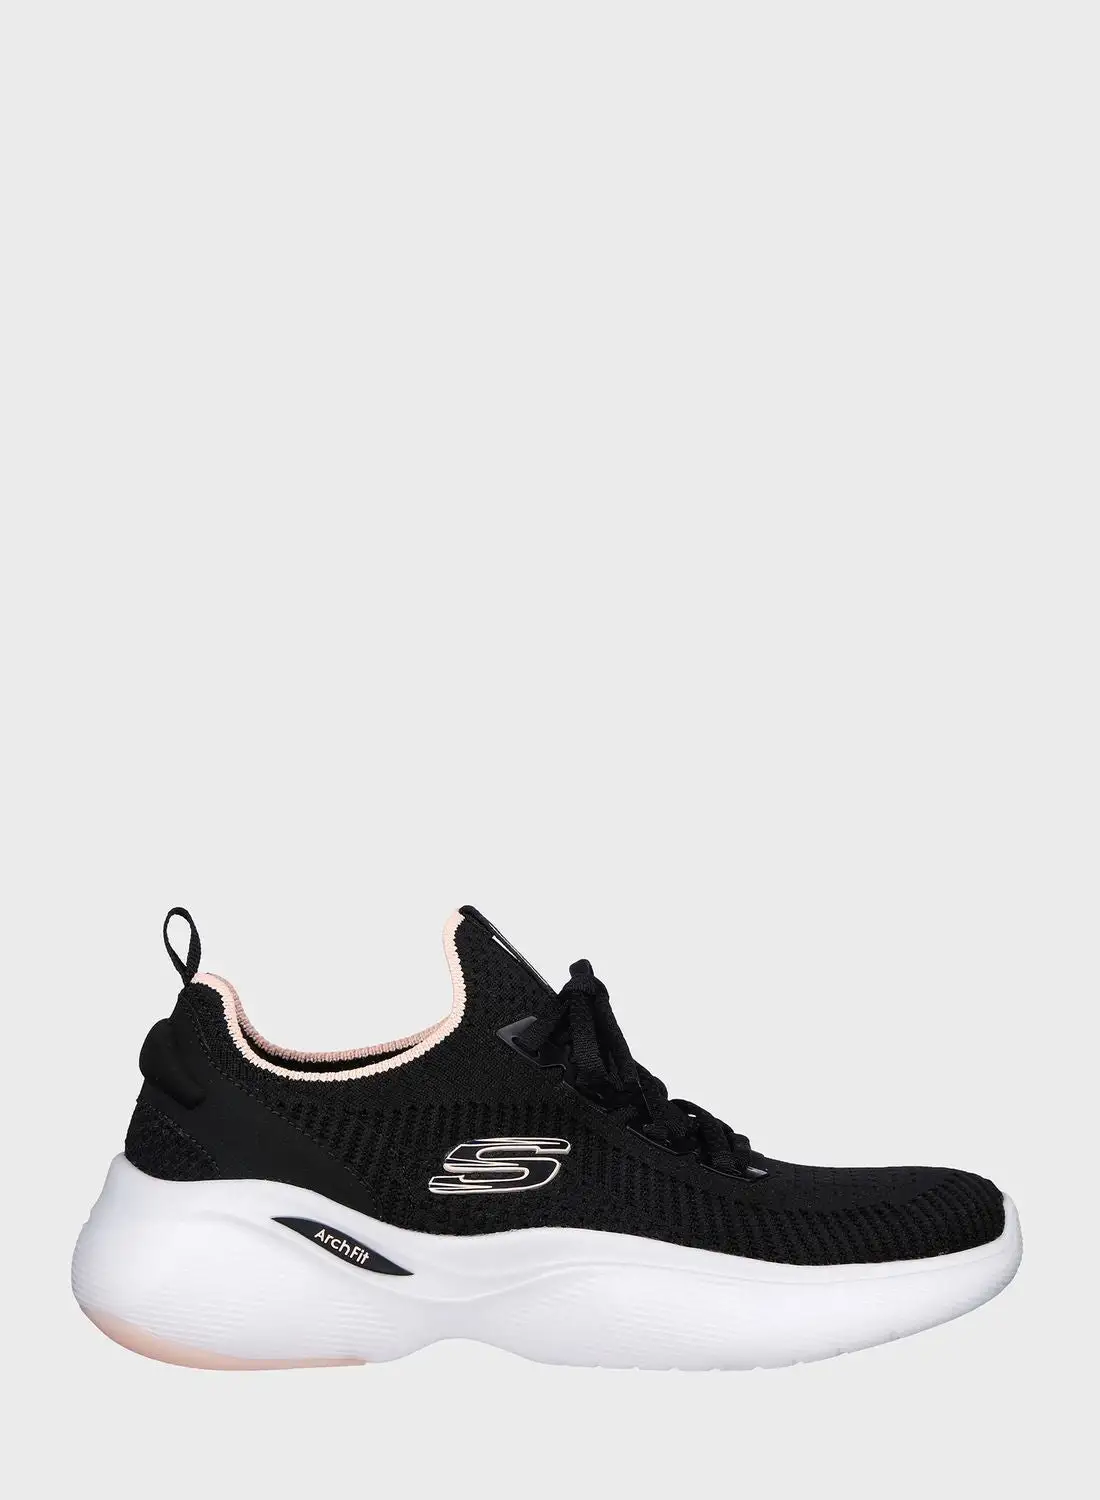 SKECHERS Arch Fit Infinity